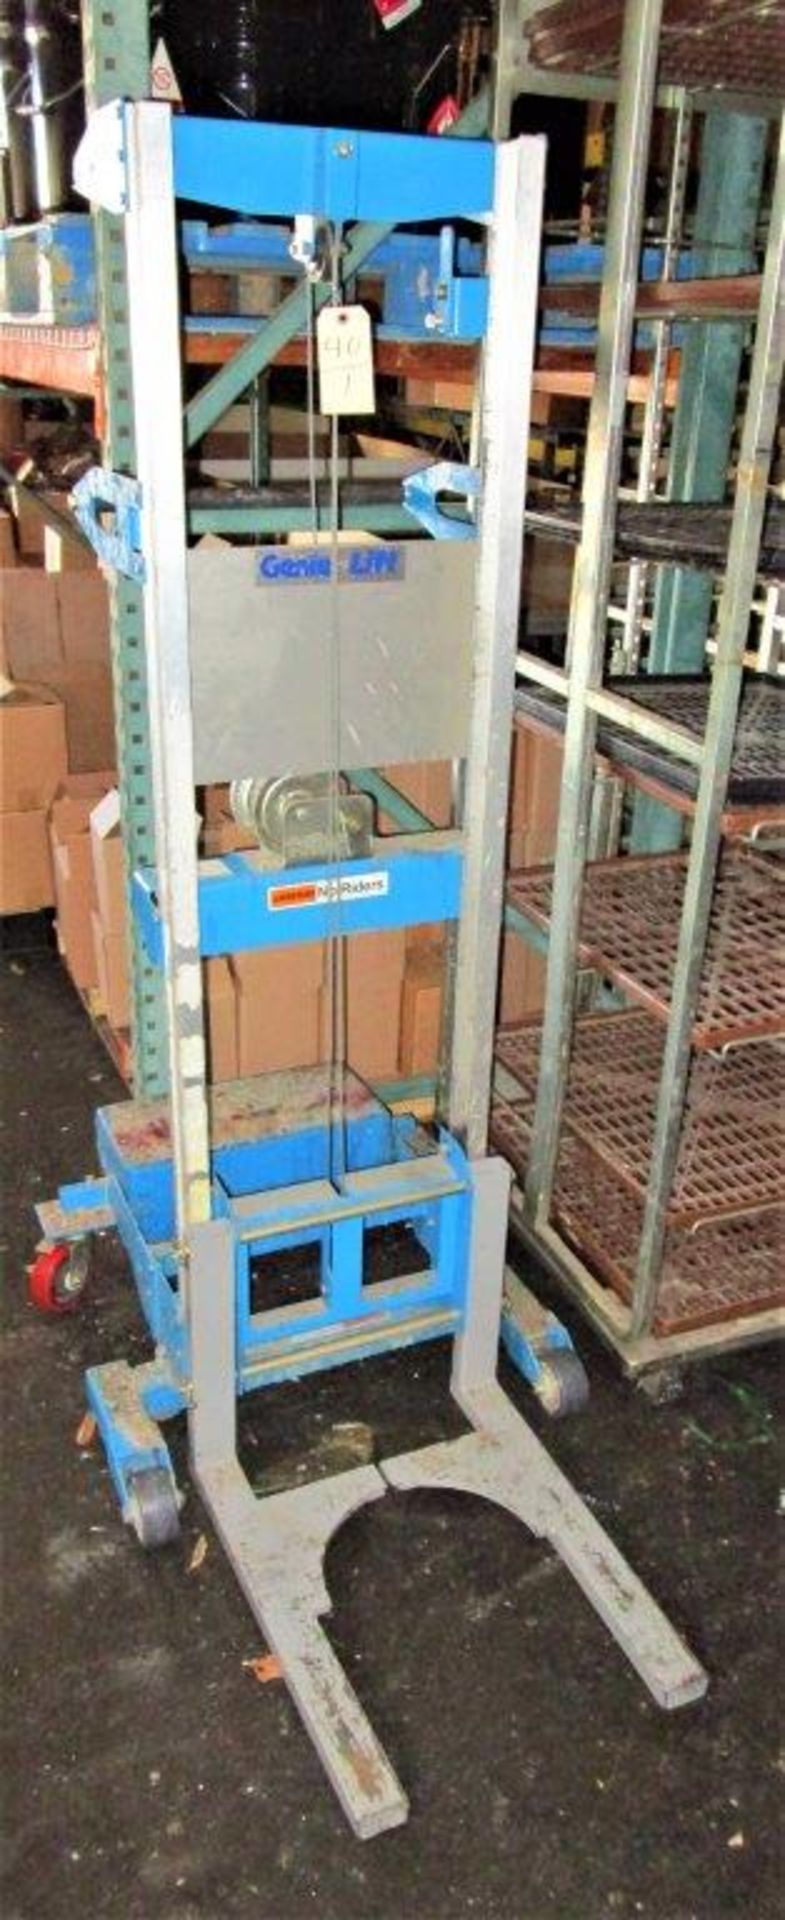 GENIE LIFT 800LB CAPACITY W COUNTER WEIGHT